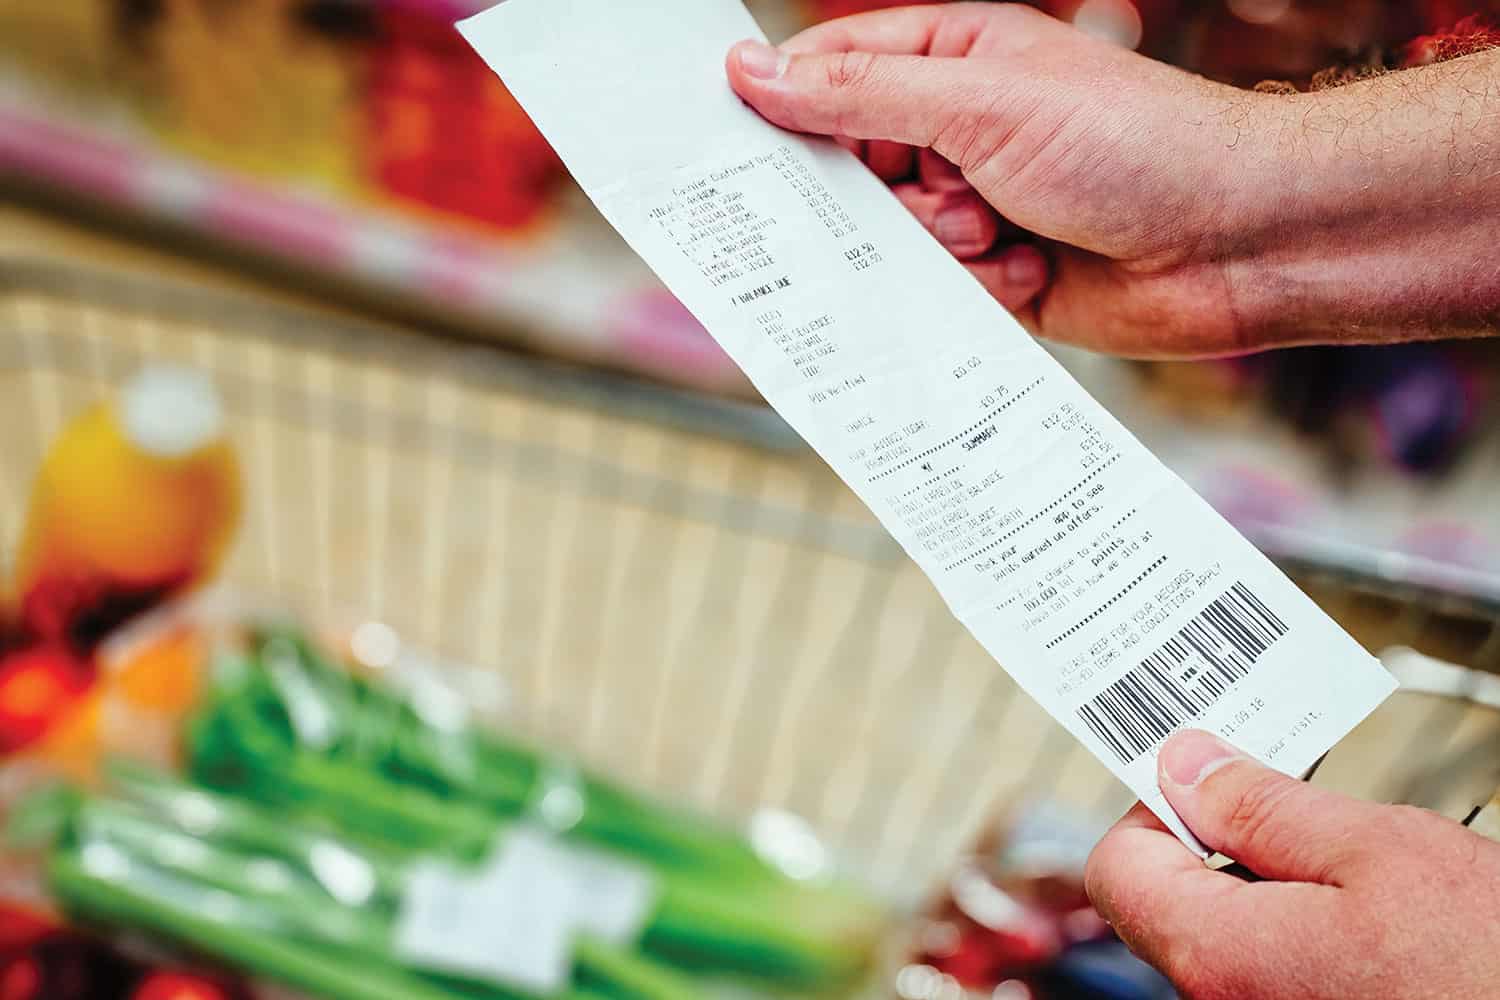 Photo close-up of hands holding supermarket receipt over shopping trolley containing groceries.